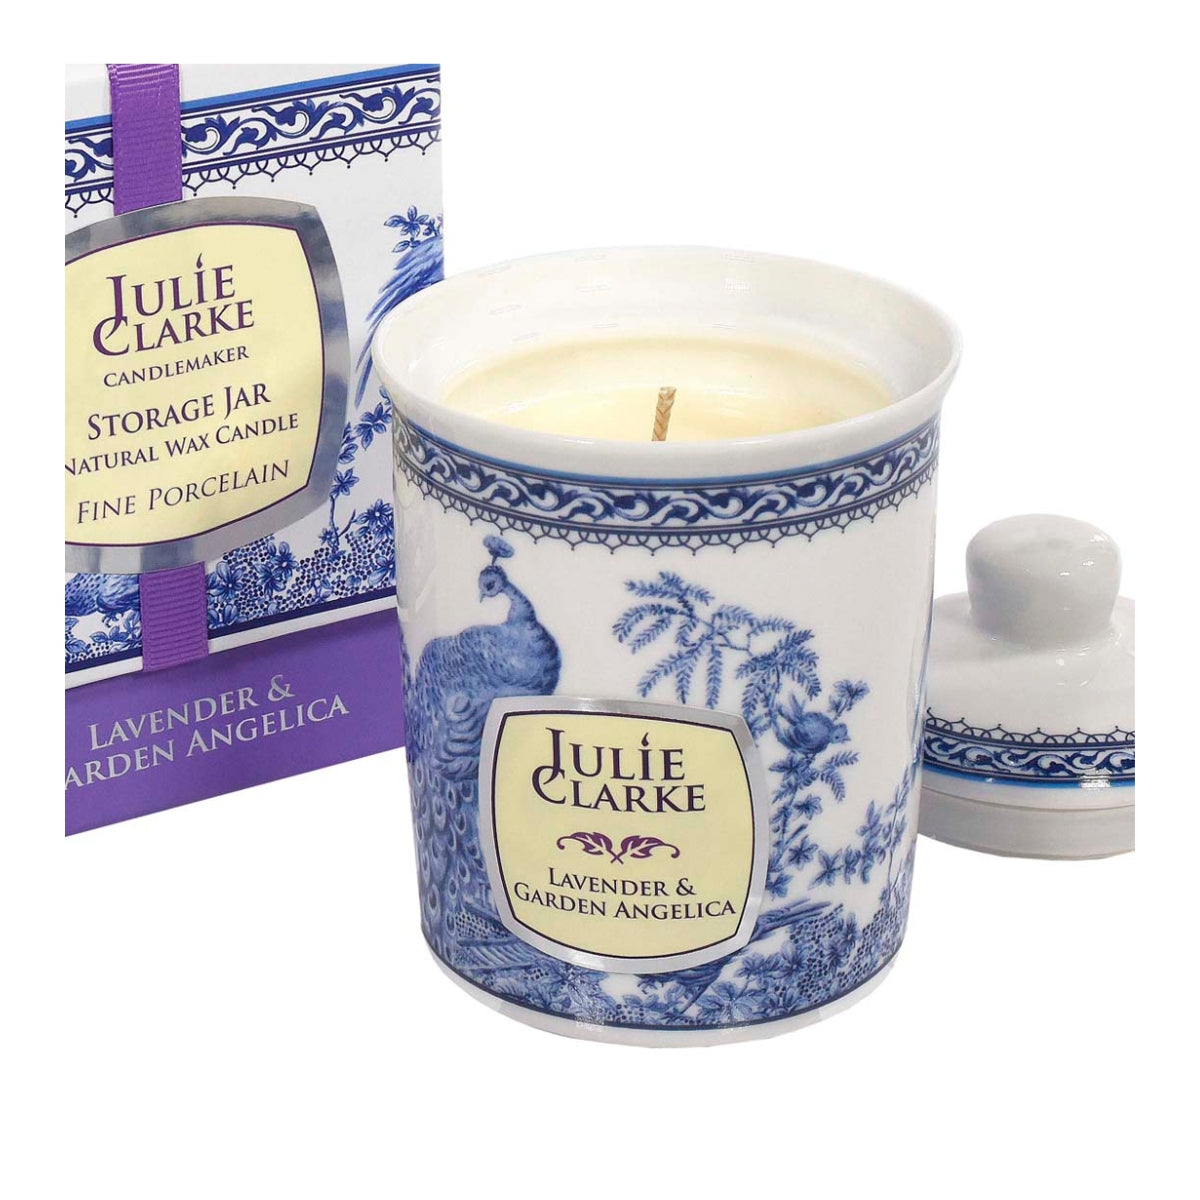 Julie Clarke Lavender and Garden Angelica Peacock Candle